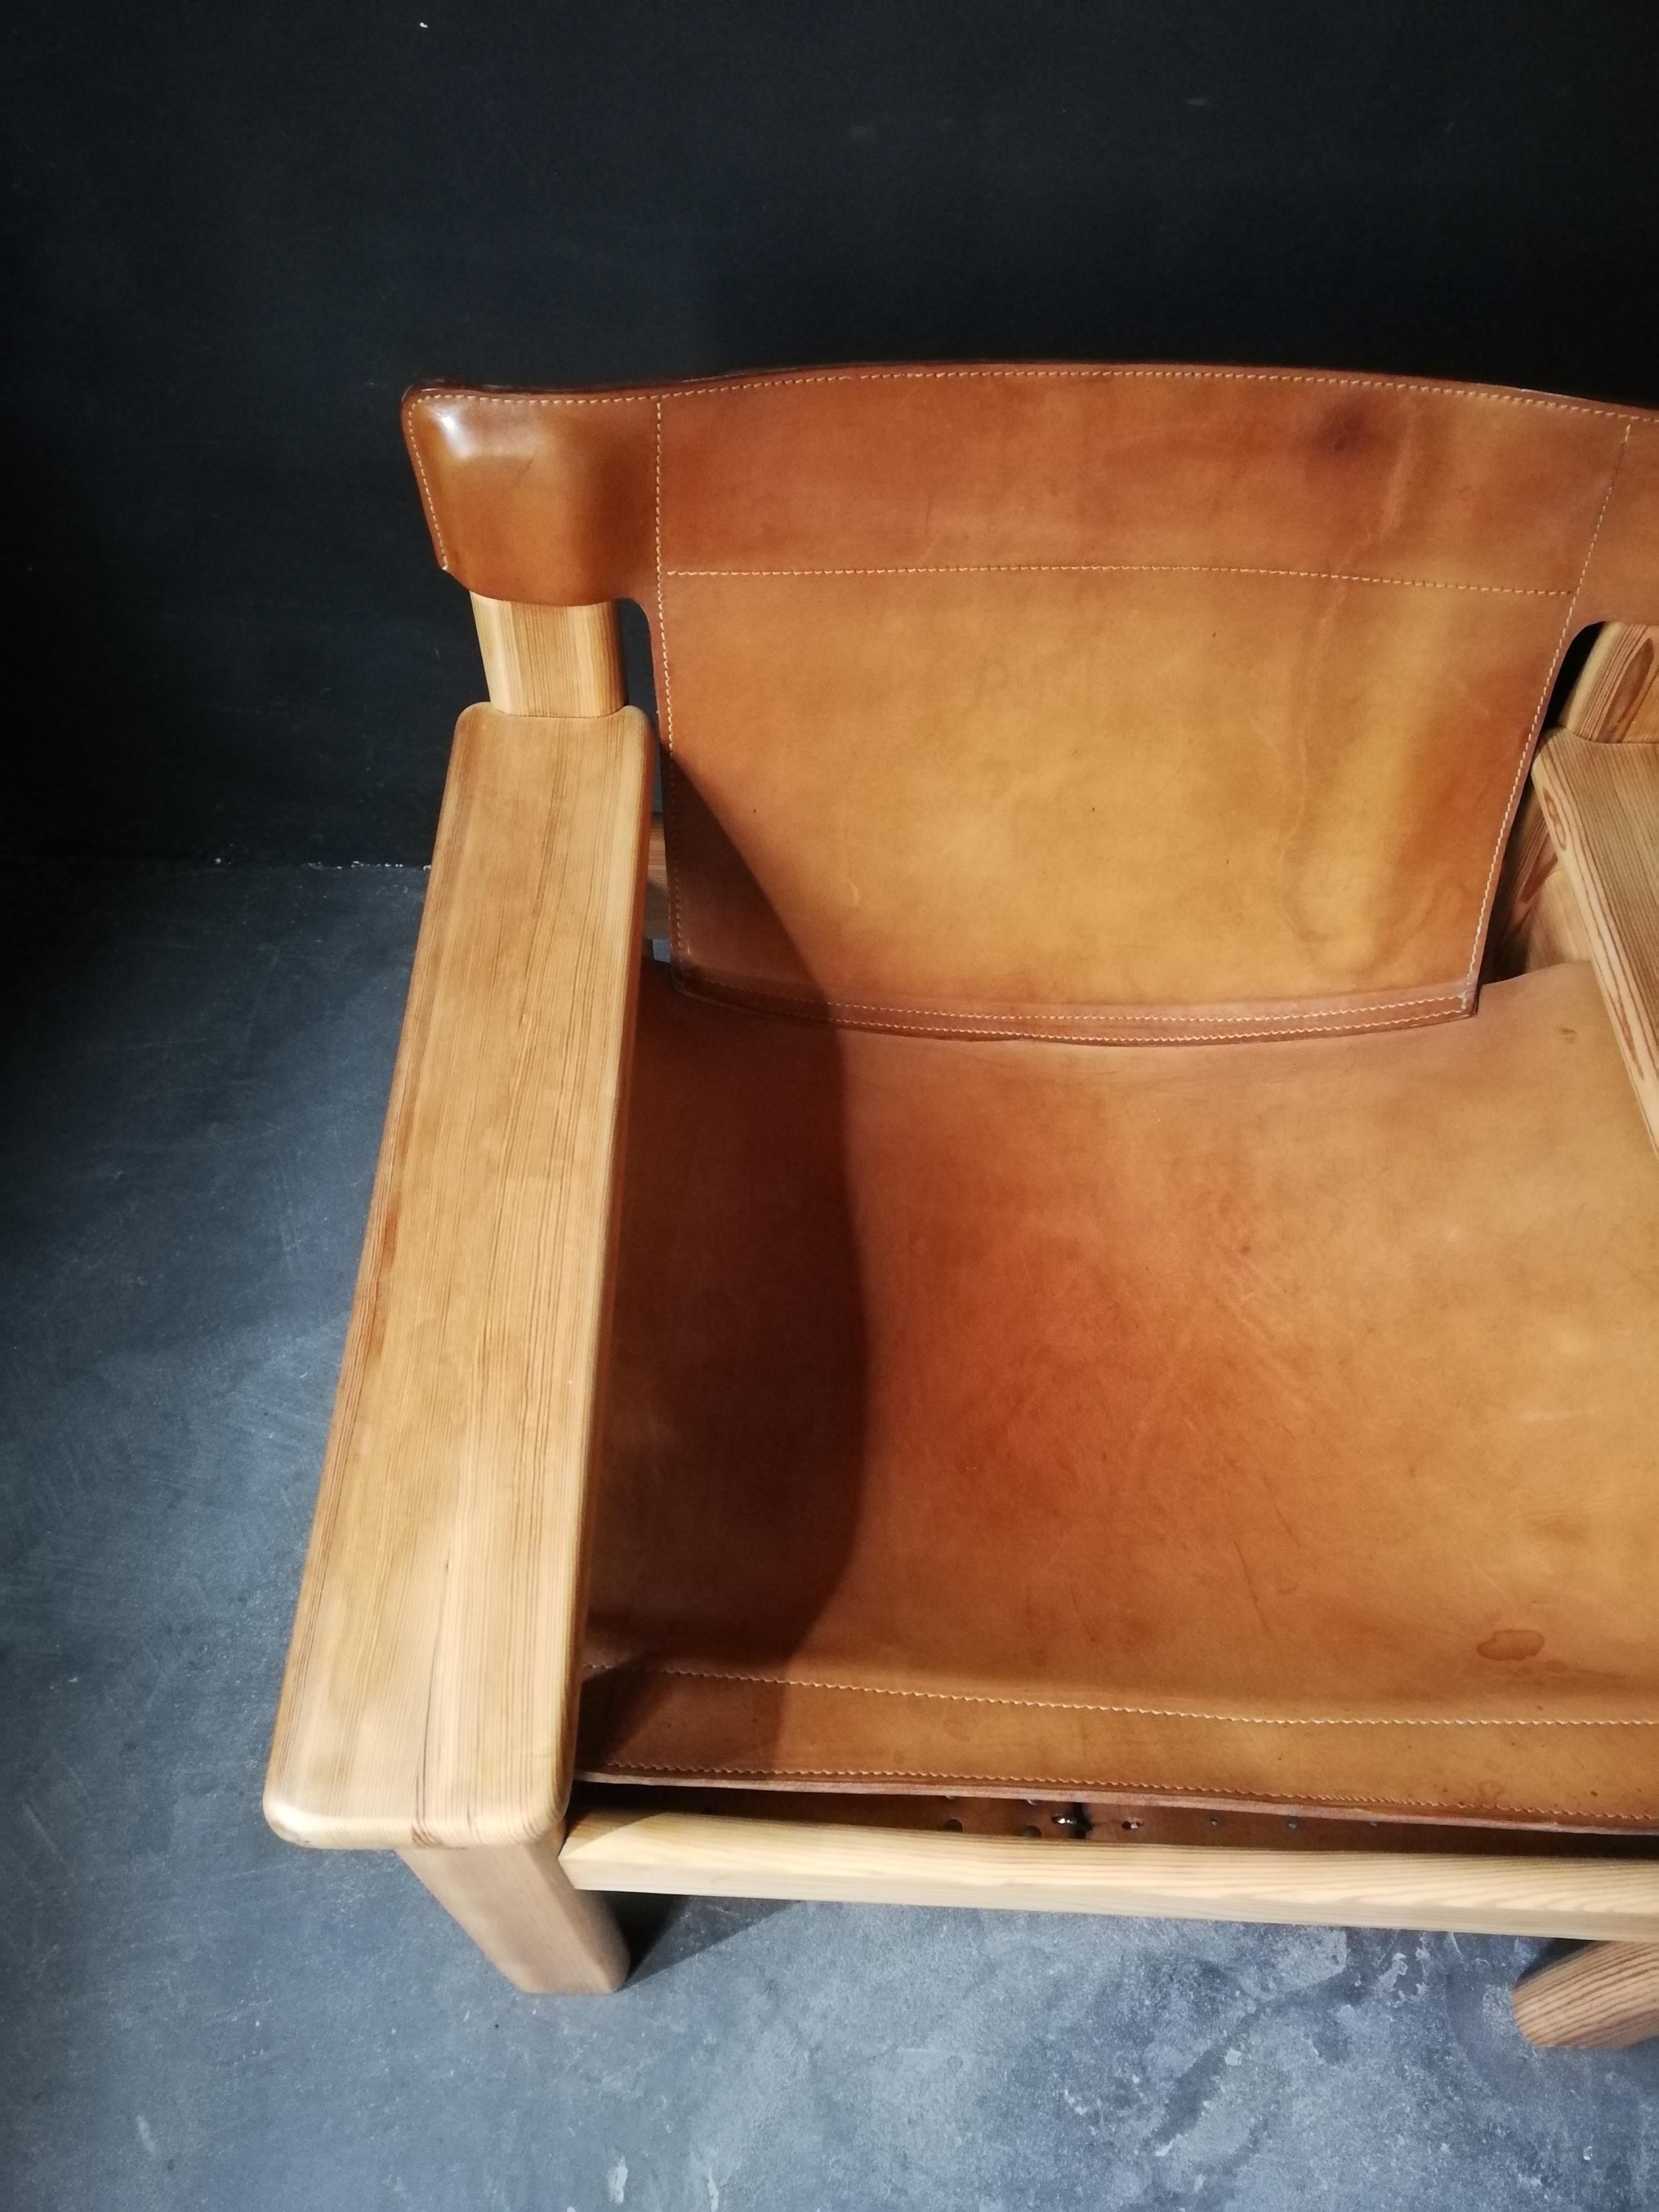 This pair of pine lounge chairs have a leather seat with a beautiful patina. These safari chairs were designed in the 1970s by Karin Mobring for Ikea.
They are in great condition and are very comfortable.